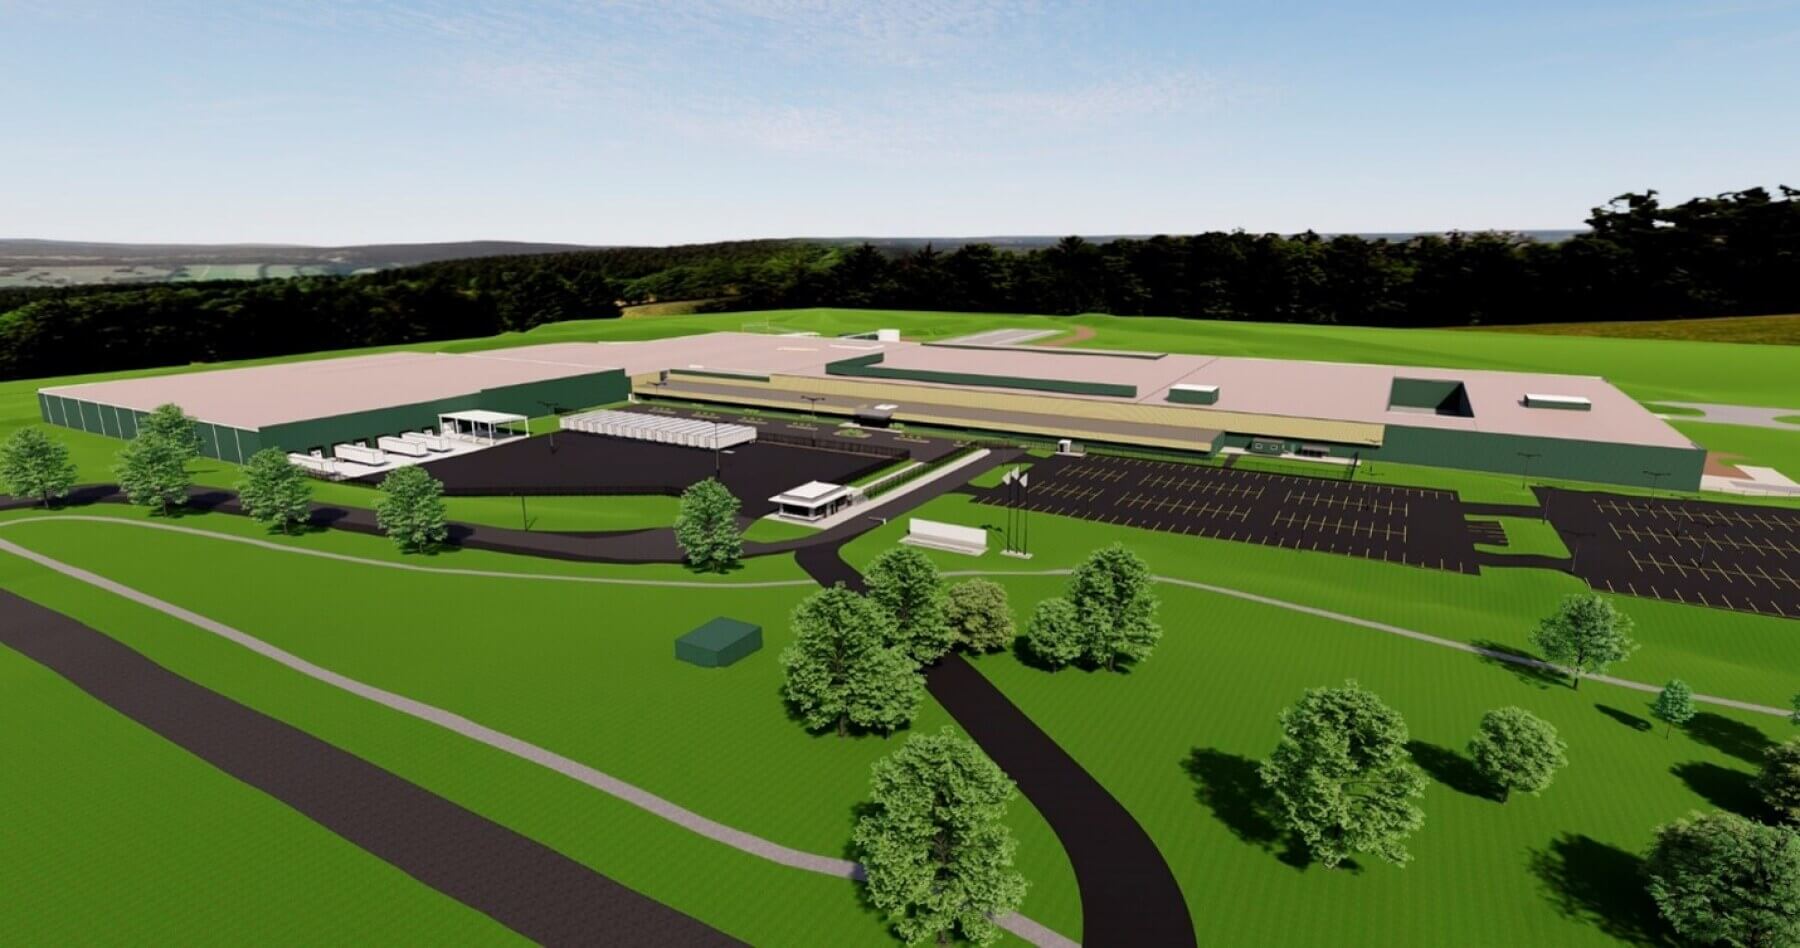 a rendering of a confidential battery plant